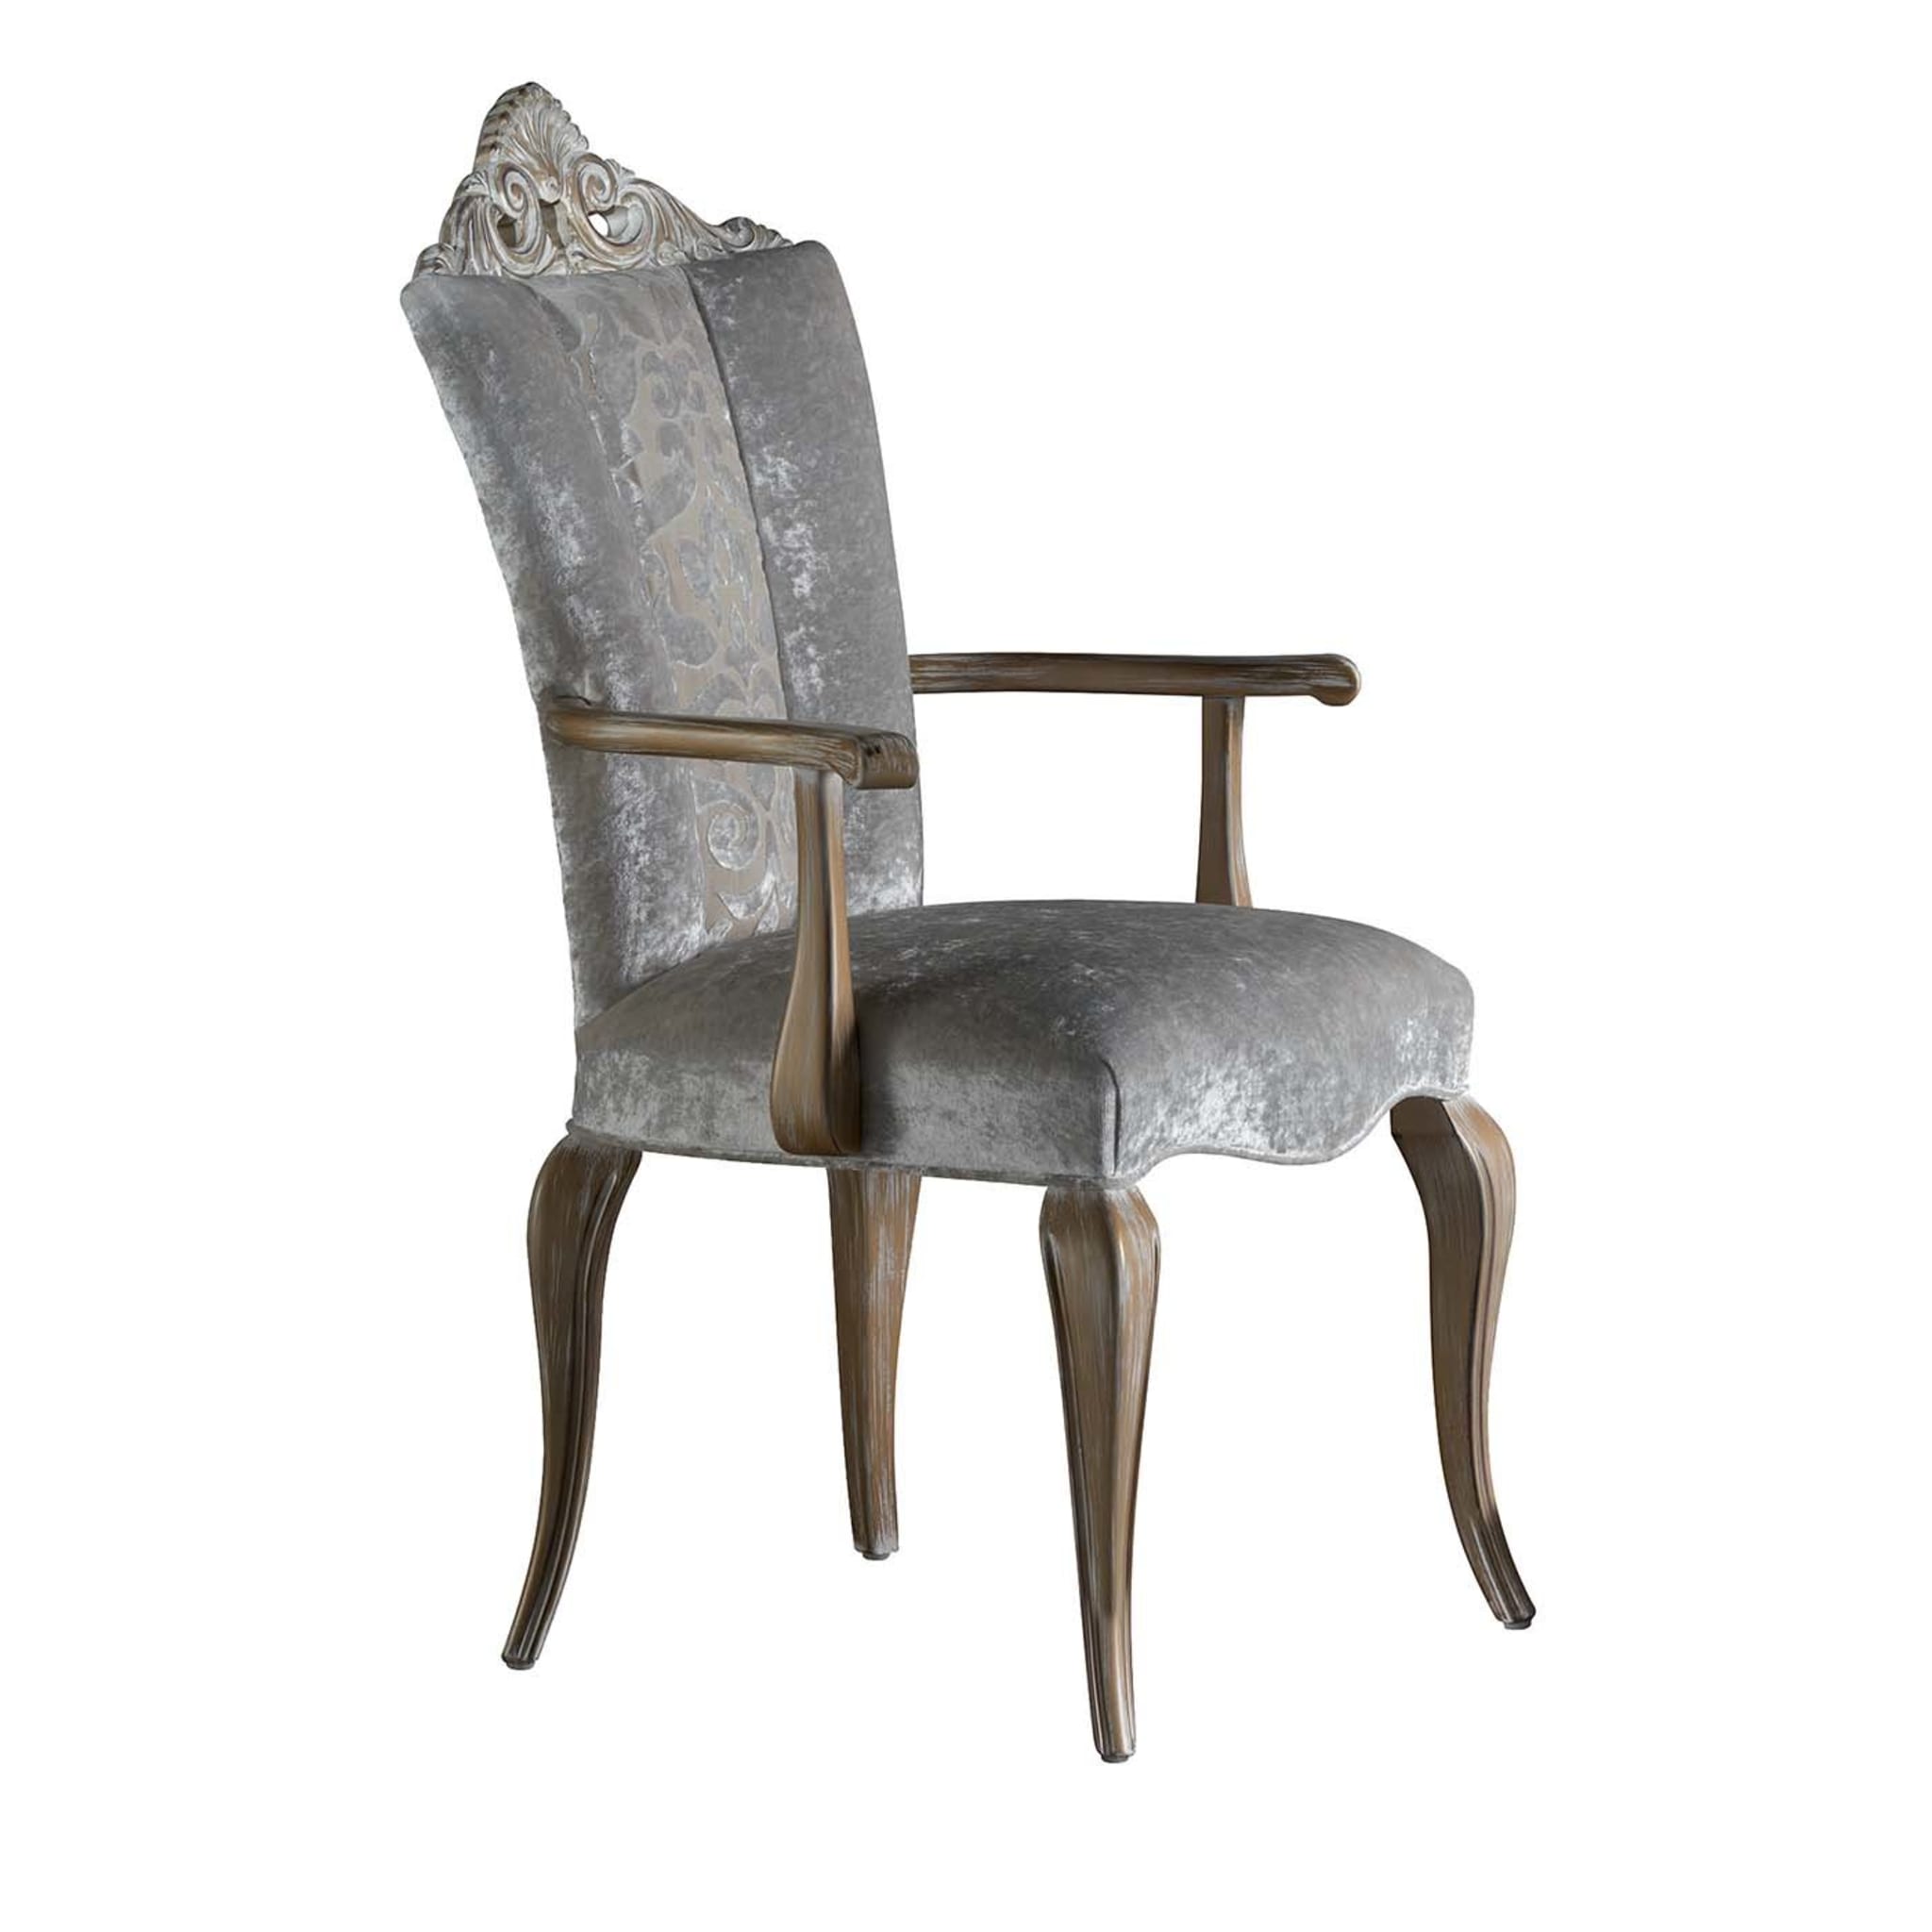 Gray Dining Chair with Armrests - Main view